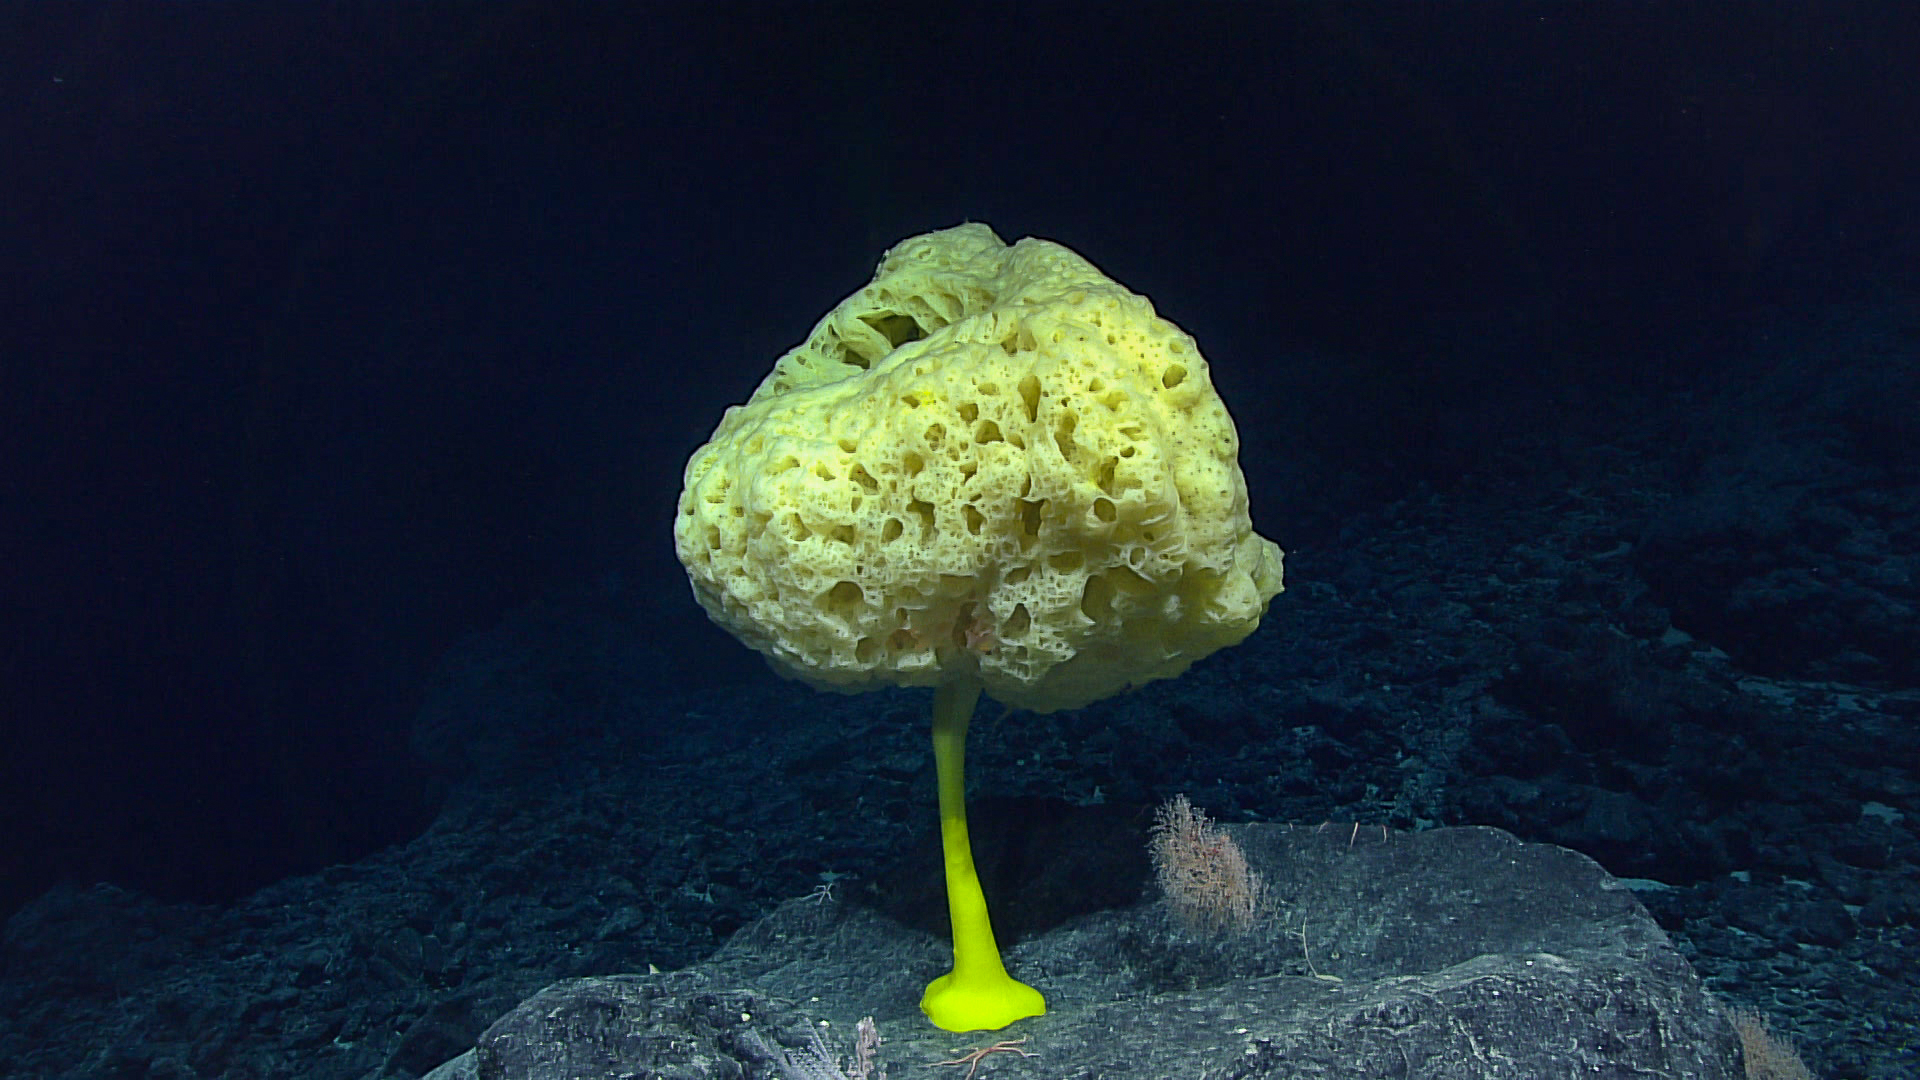 A bright yellow sponge covered in small holes on an even brighter yellow stalk, against a dark blue background